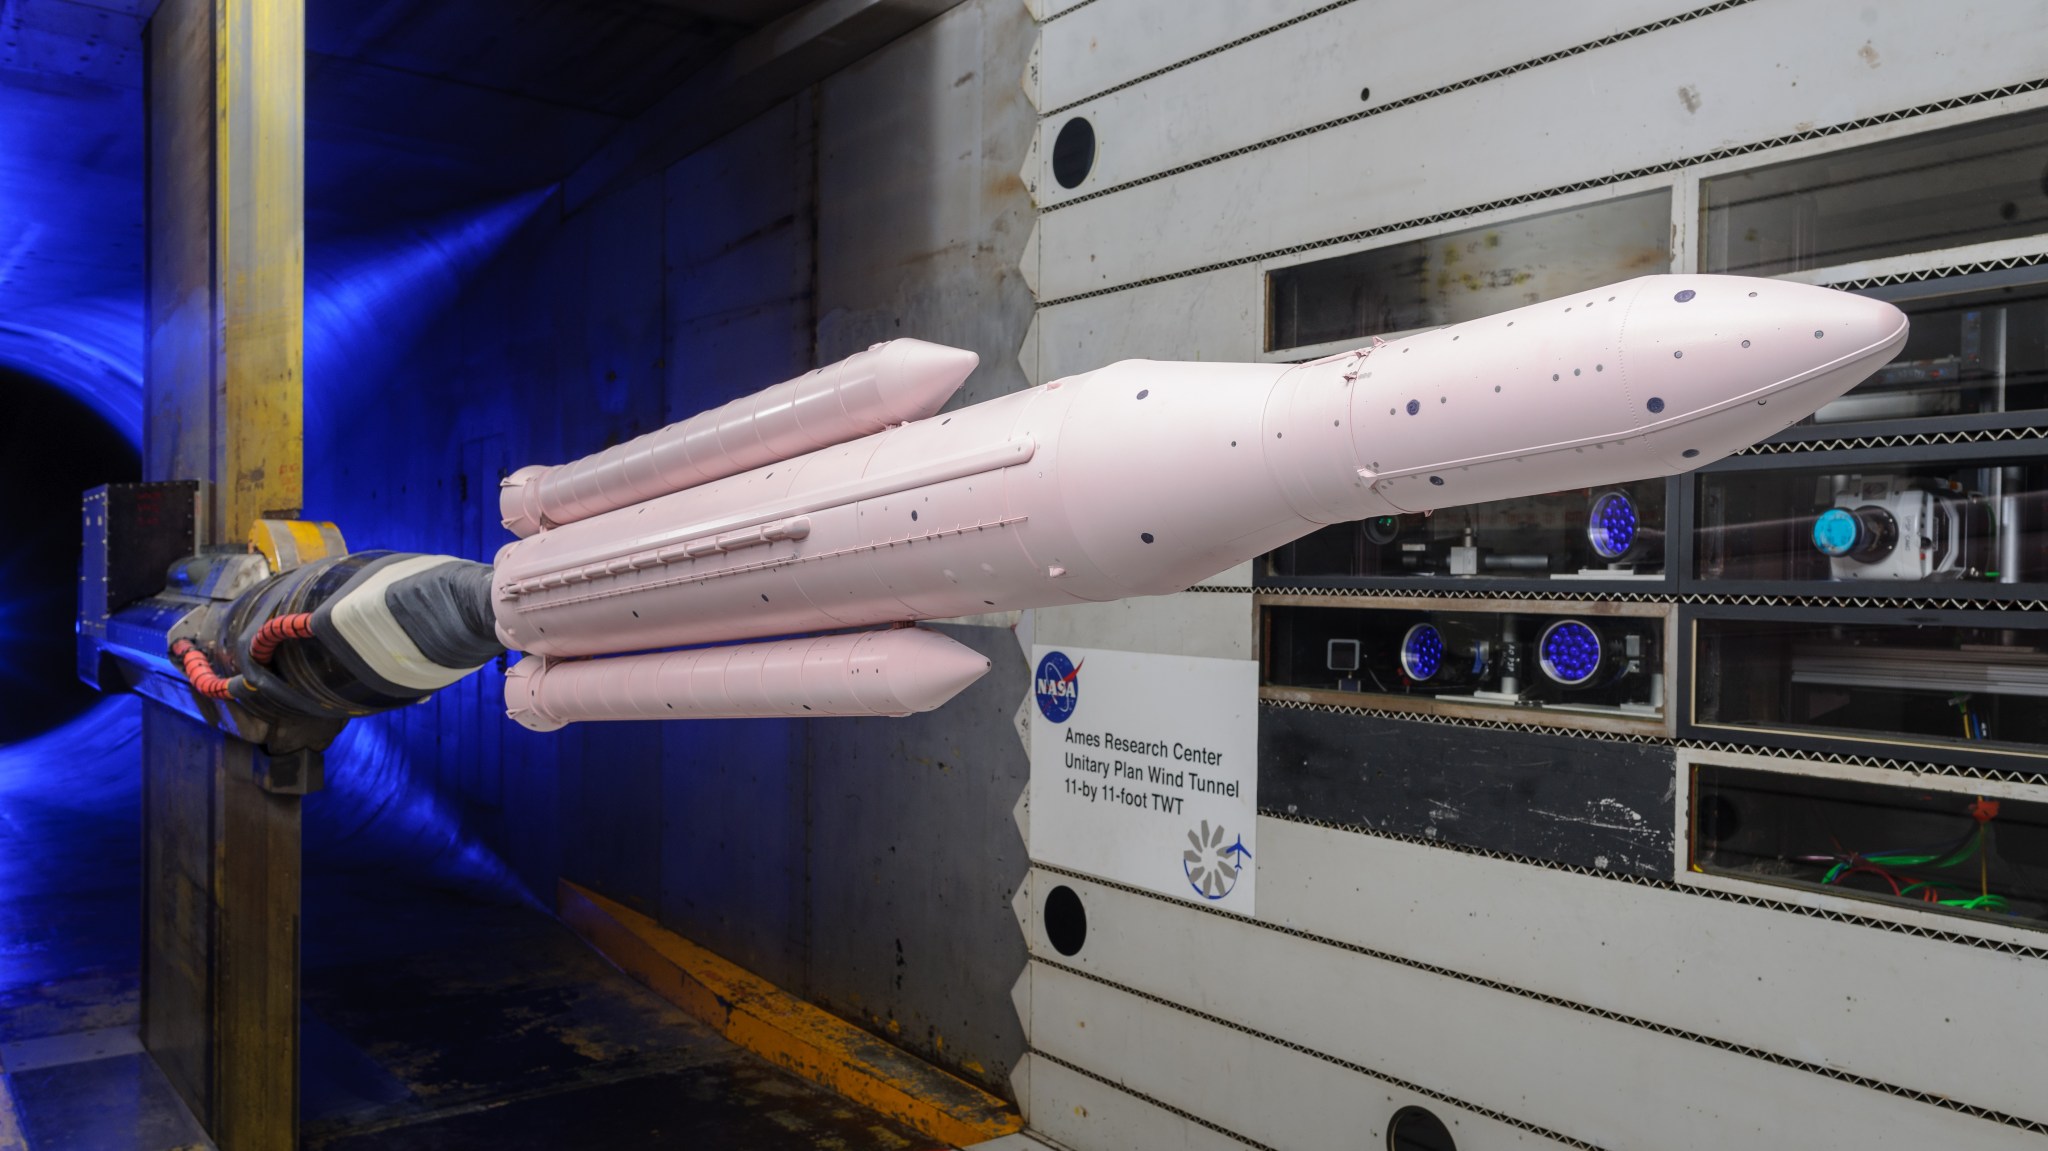 A rocket model painted pink is mounted in a wind tunnel with blue light behind